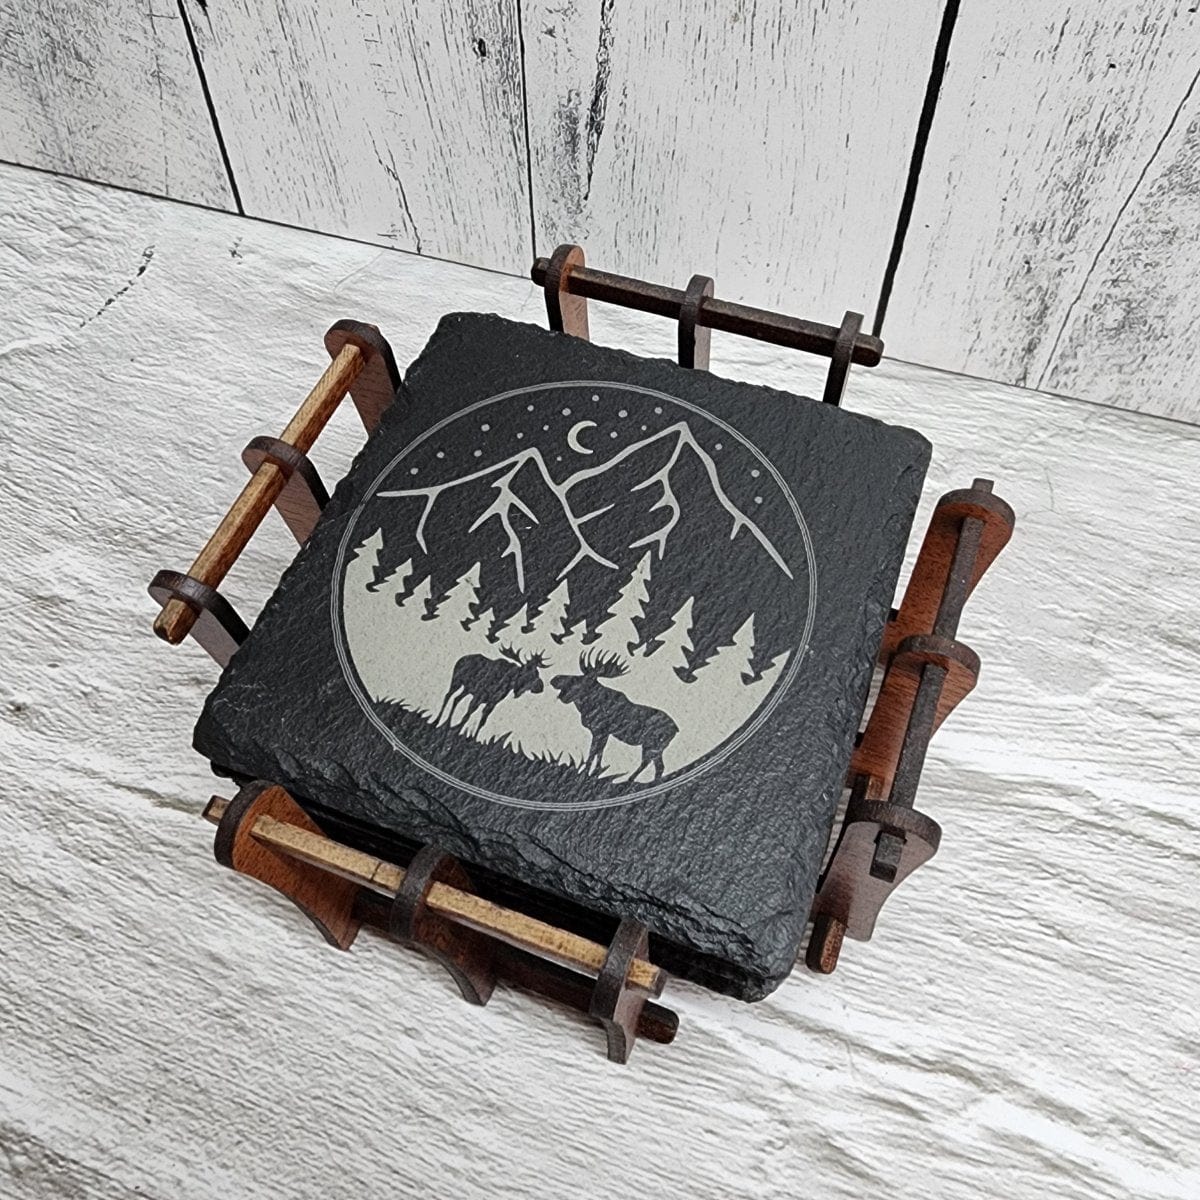 Slate Coaster Set with your choice of design or upload your own image to be engraved - Hats Signs Patches 3D printing Engraving